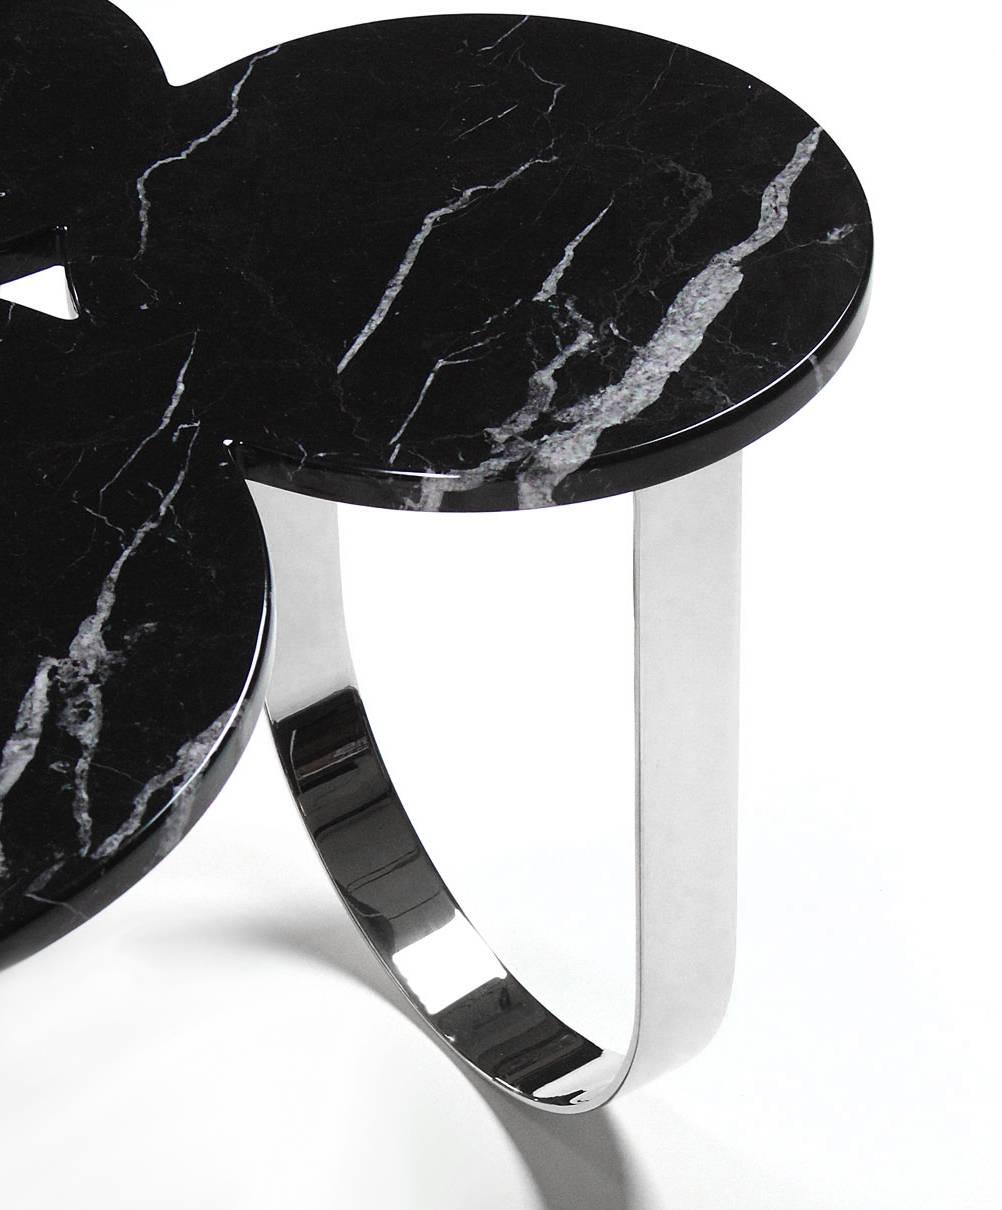 The 'Cloud' is a spectacular side table with structure in mirror polished stainless steel and top in Marquinia marble. The mirror-like finishing of the stainless steel creates different perceptions of this particular material and allows interesting